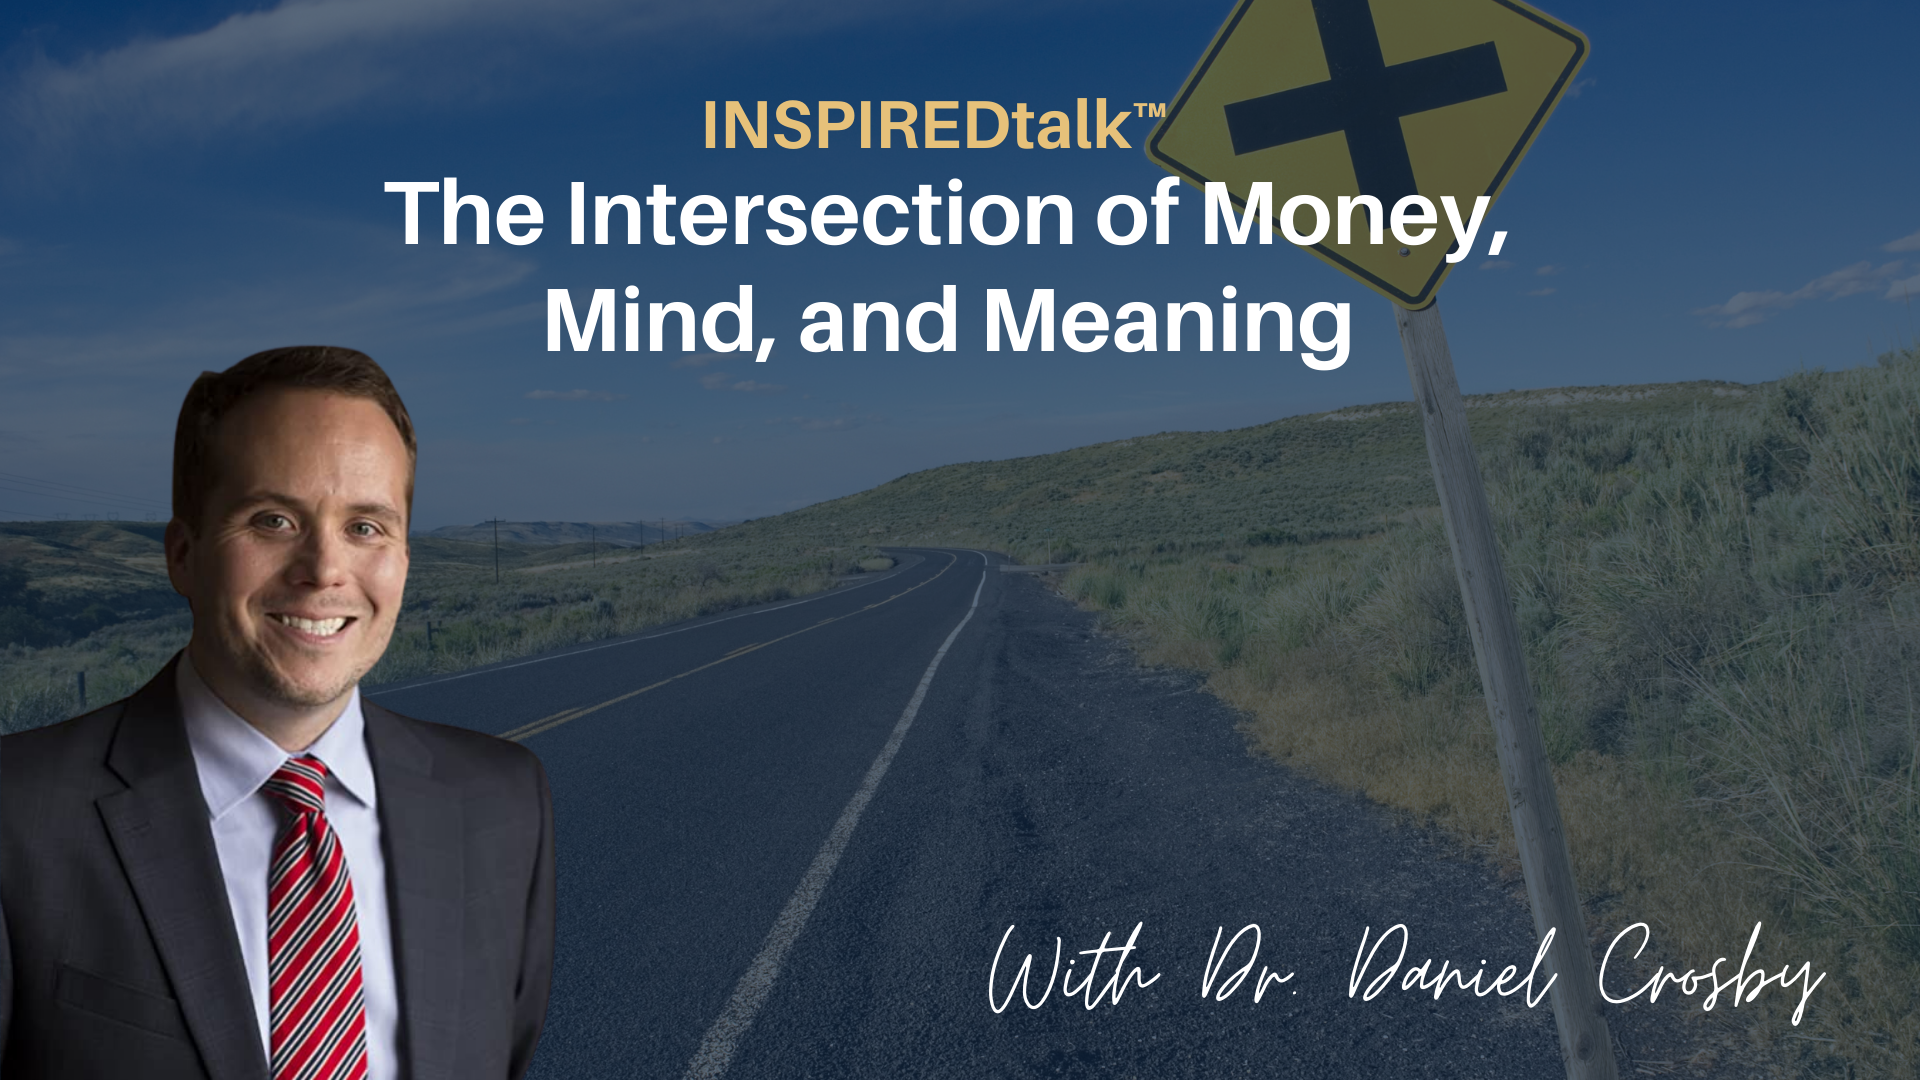 Watch the INSPIREDtalk: The Intersection of Money, Mind, and Meaning with Dr. Daniel Crosby